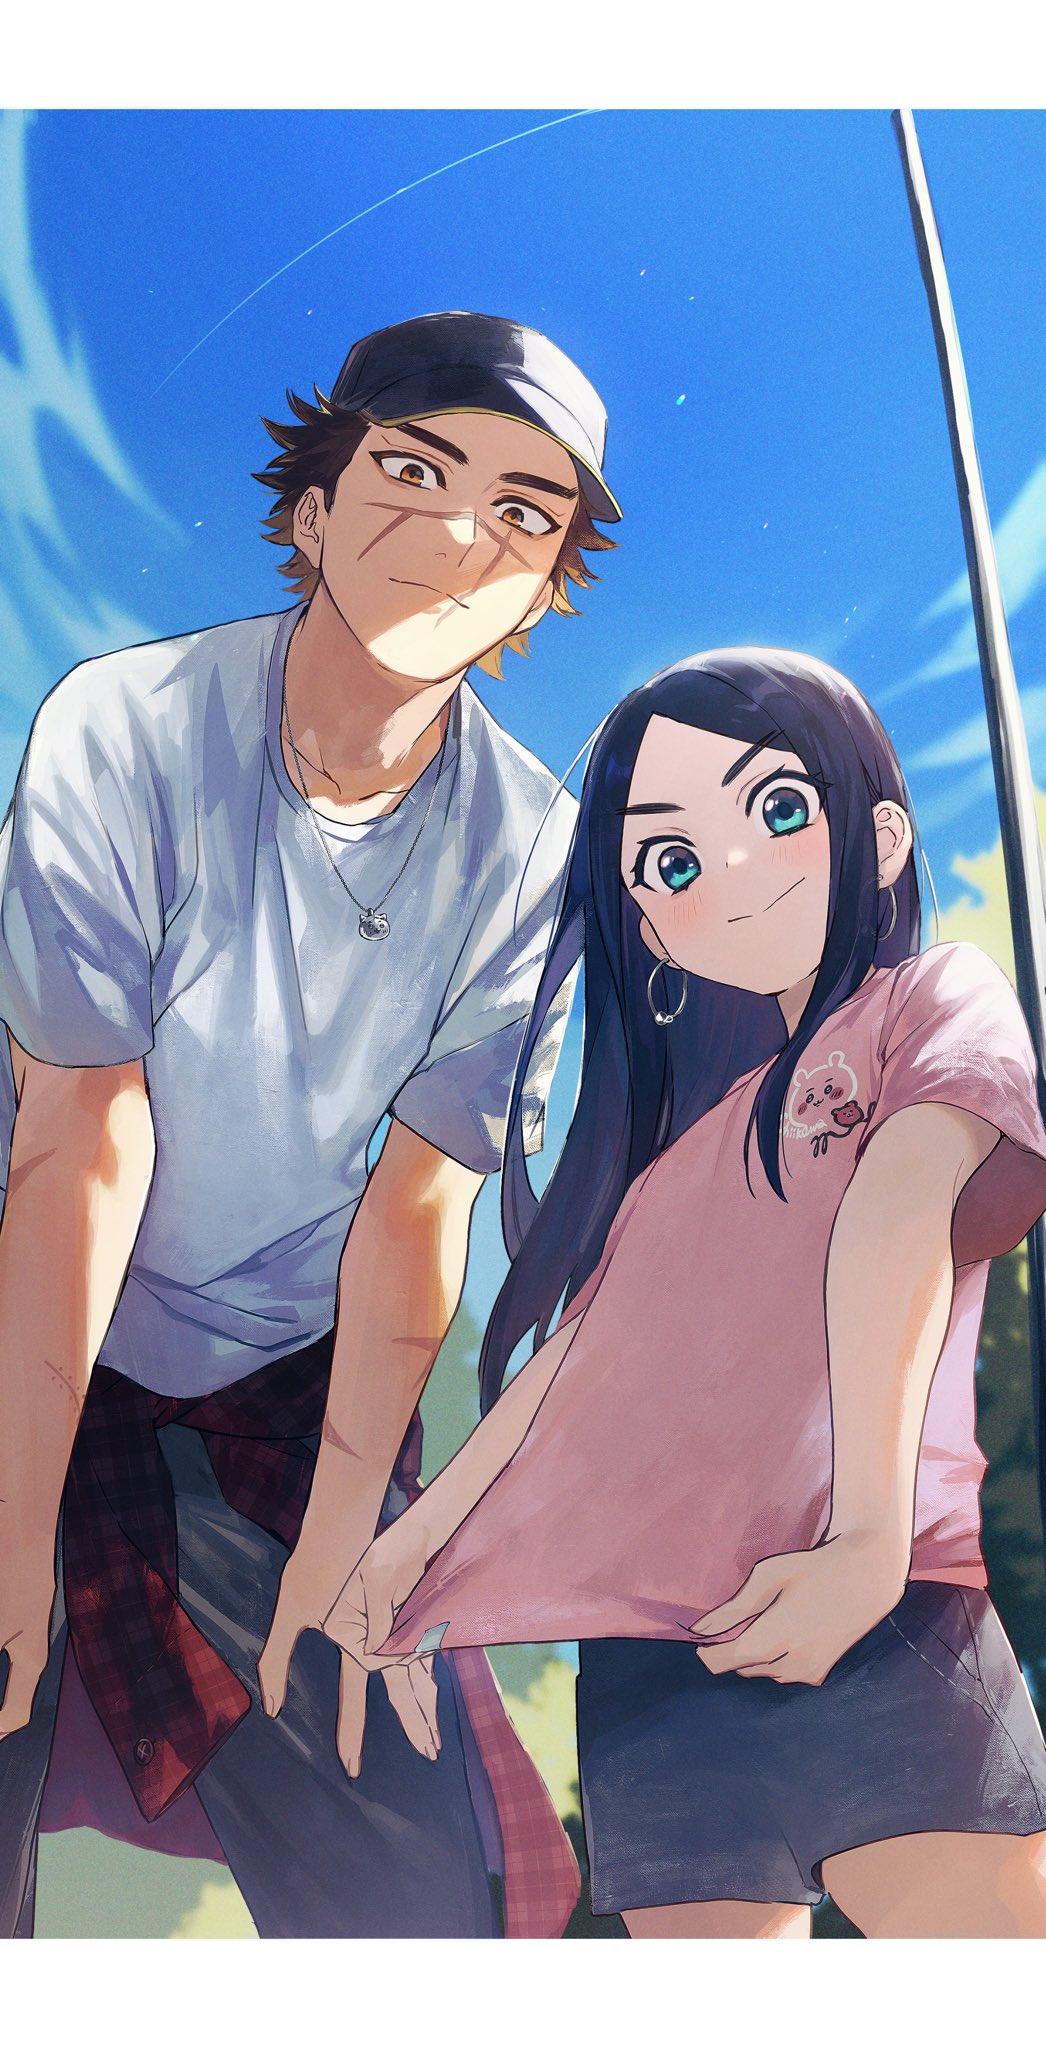 1boy 1girl alternate_costume asirpa bangs black_shorts blue_hair blue_shirt blue_sky blush brown_eyes brown_hair closed_mouth clothes_around_waist cloud cloudy_sky collarbone commentary_request contemporary dark_blue_hair day denim denim_shorts earrings fingernails framed golden_kamuy green_eyes grey_pants hat height_difference highres hoop_earrings jacket jacket_around_waist jewelry long_hair looking_at_viewer multiple_scars outdoors oziozi_kamuy pants parted_bangs pendant pink_shirt scar scar_on_arm scar_on_cheek scar_on_face scar_on_mouth scar_on_nose shaded_face shirt short_hair short_sleeves shorts sky smile standing sugimoto_saichi sun t-shirt